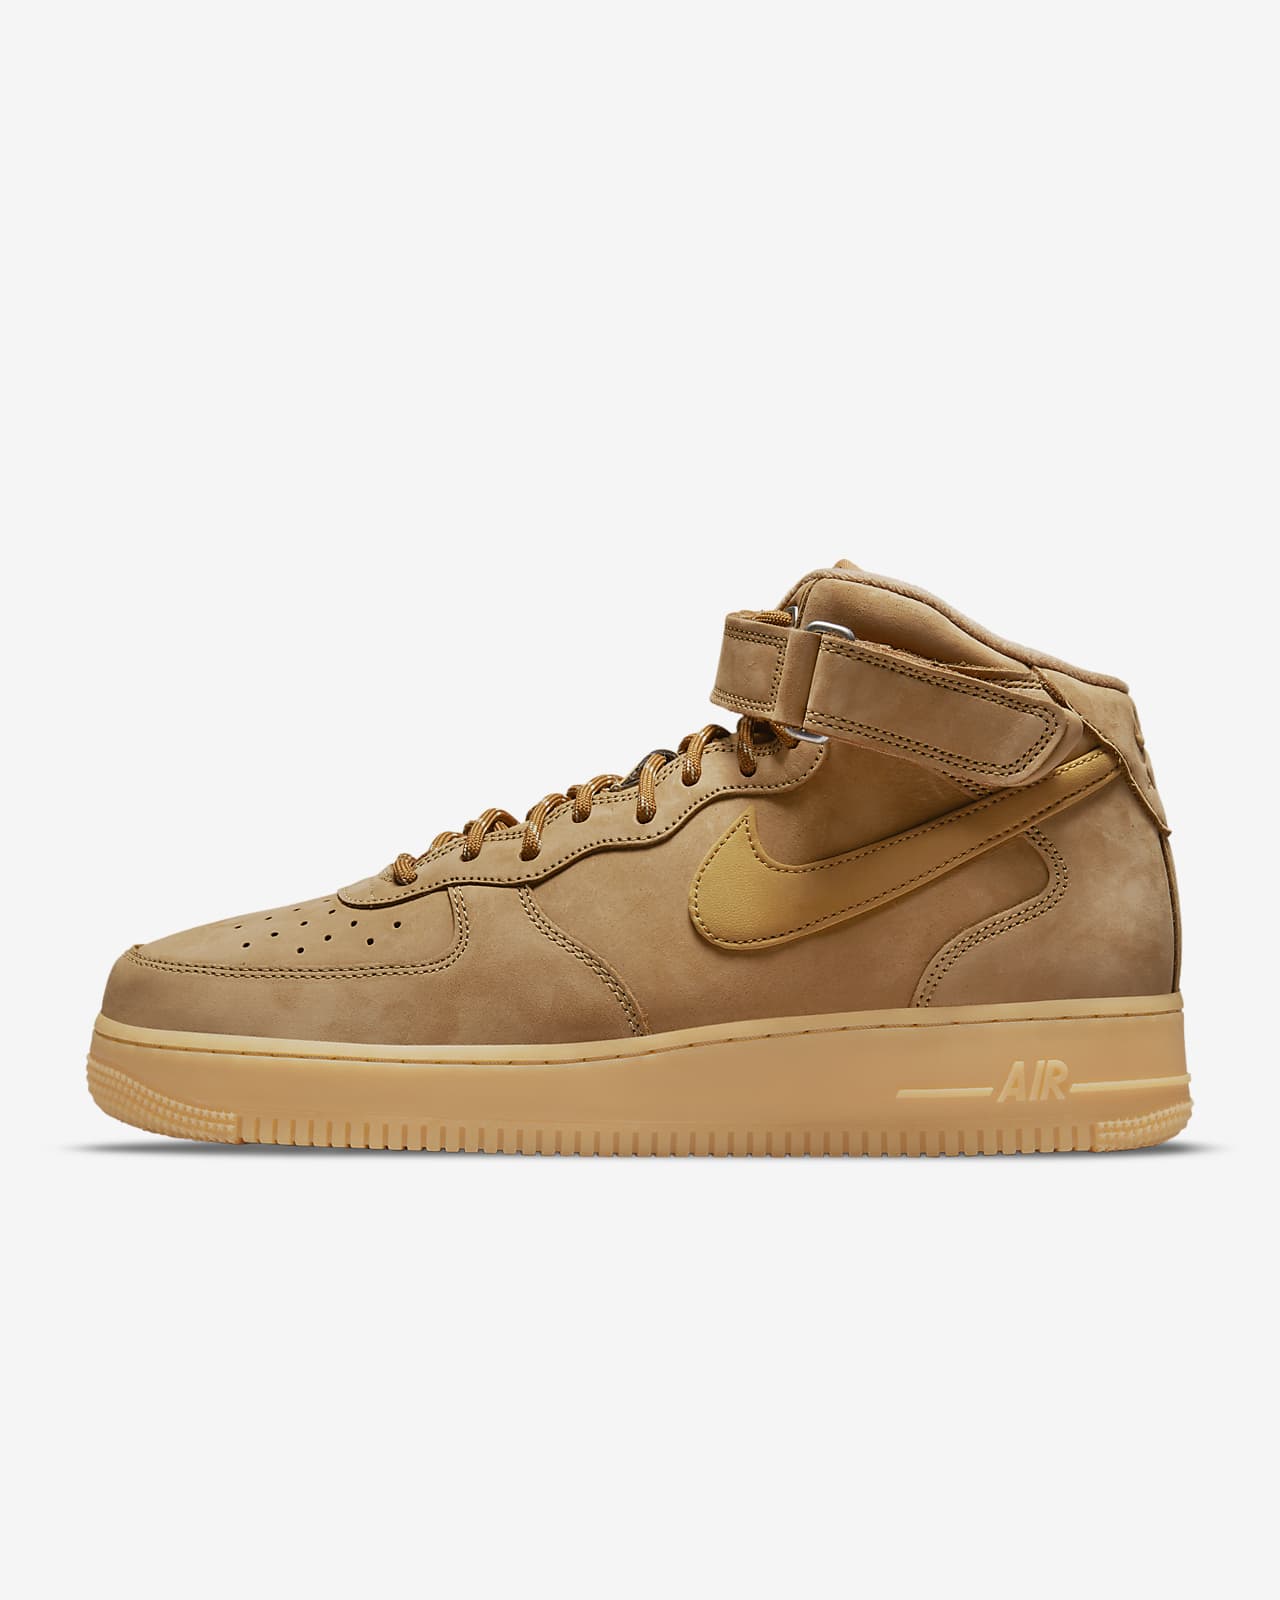 Chaussures Nike Air Force 1 Mid '07 pour Homme